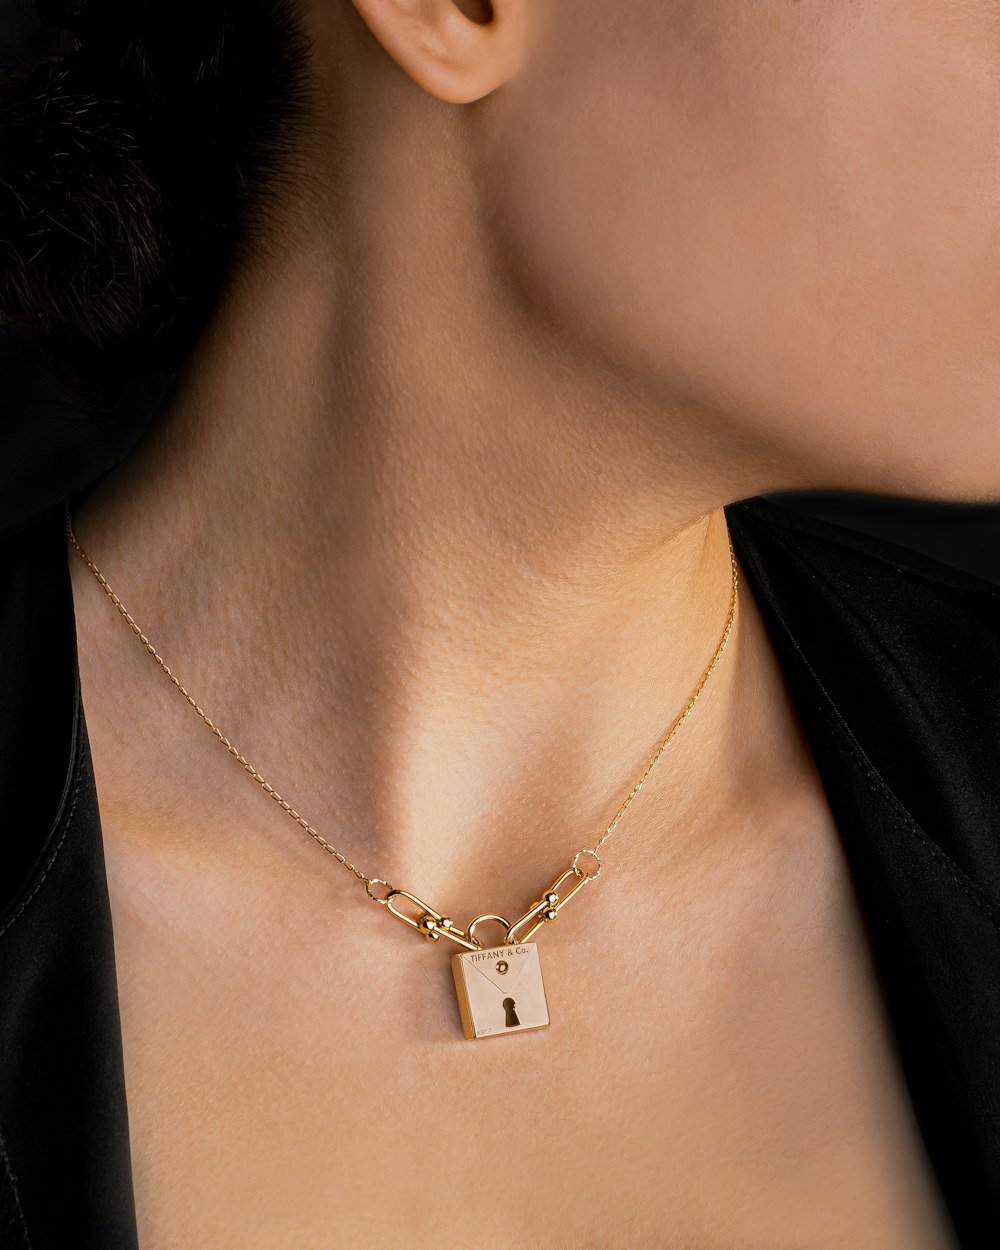 a woman wearing a necklace with a lock on it